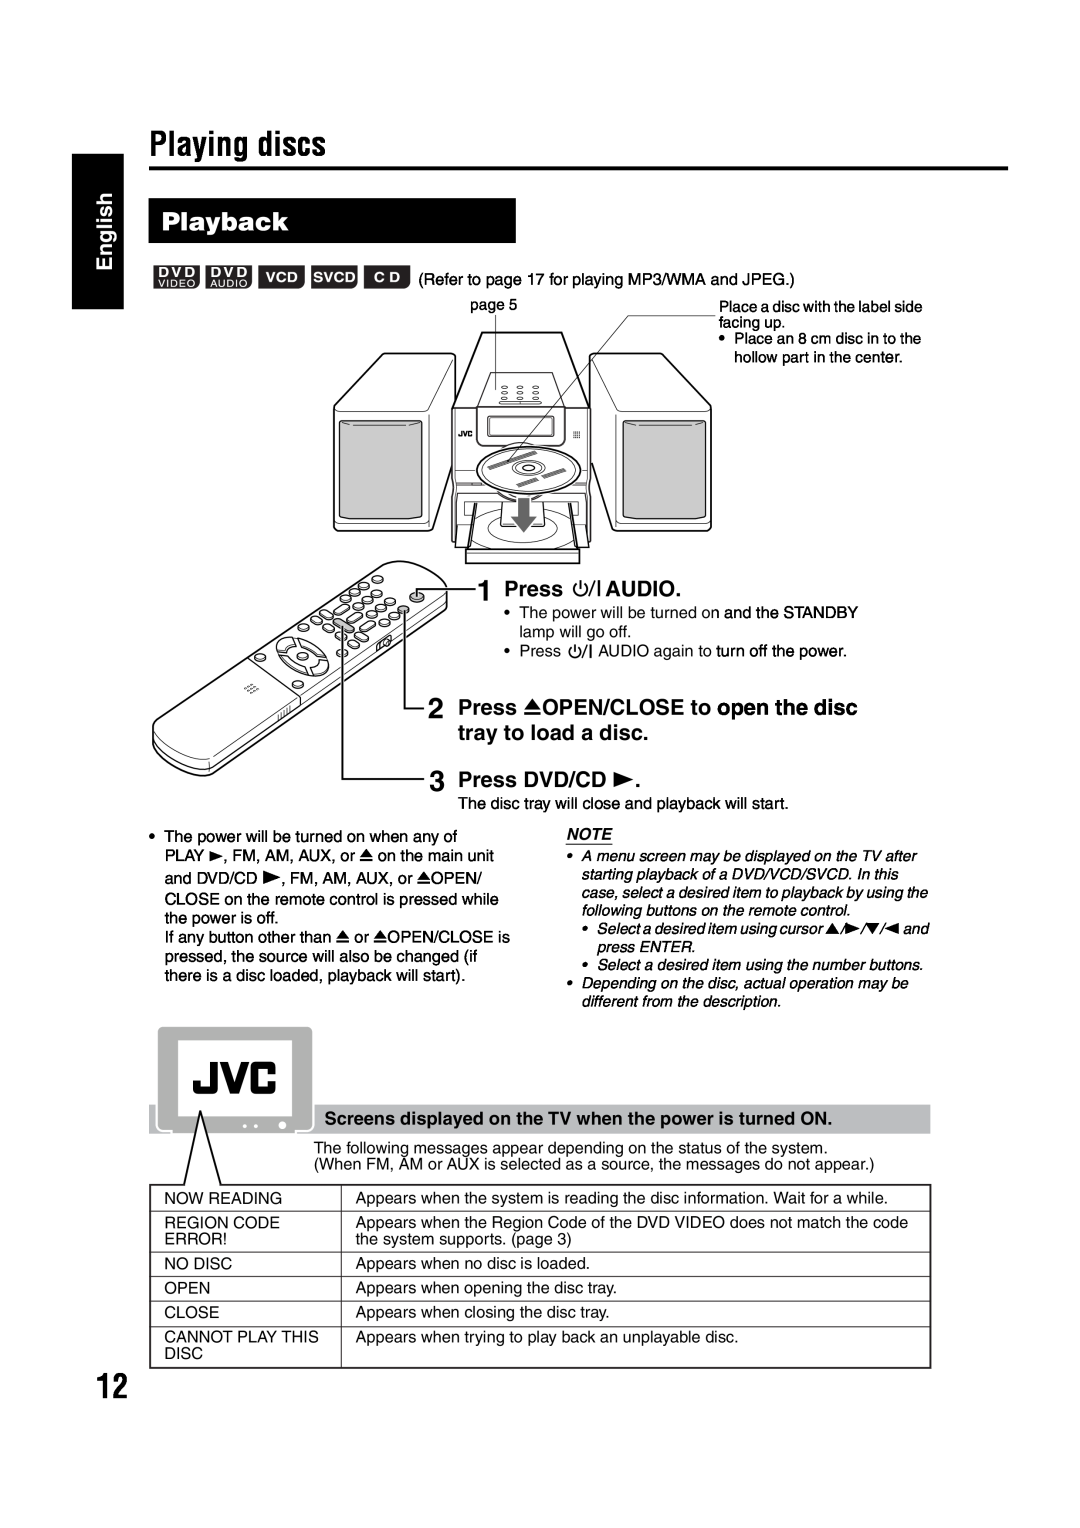 JVC GVT0142-001A Playing discs, Playback, English, Audio, Press 0OPEN/CLOSE to open the disc, tray to load a disc 